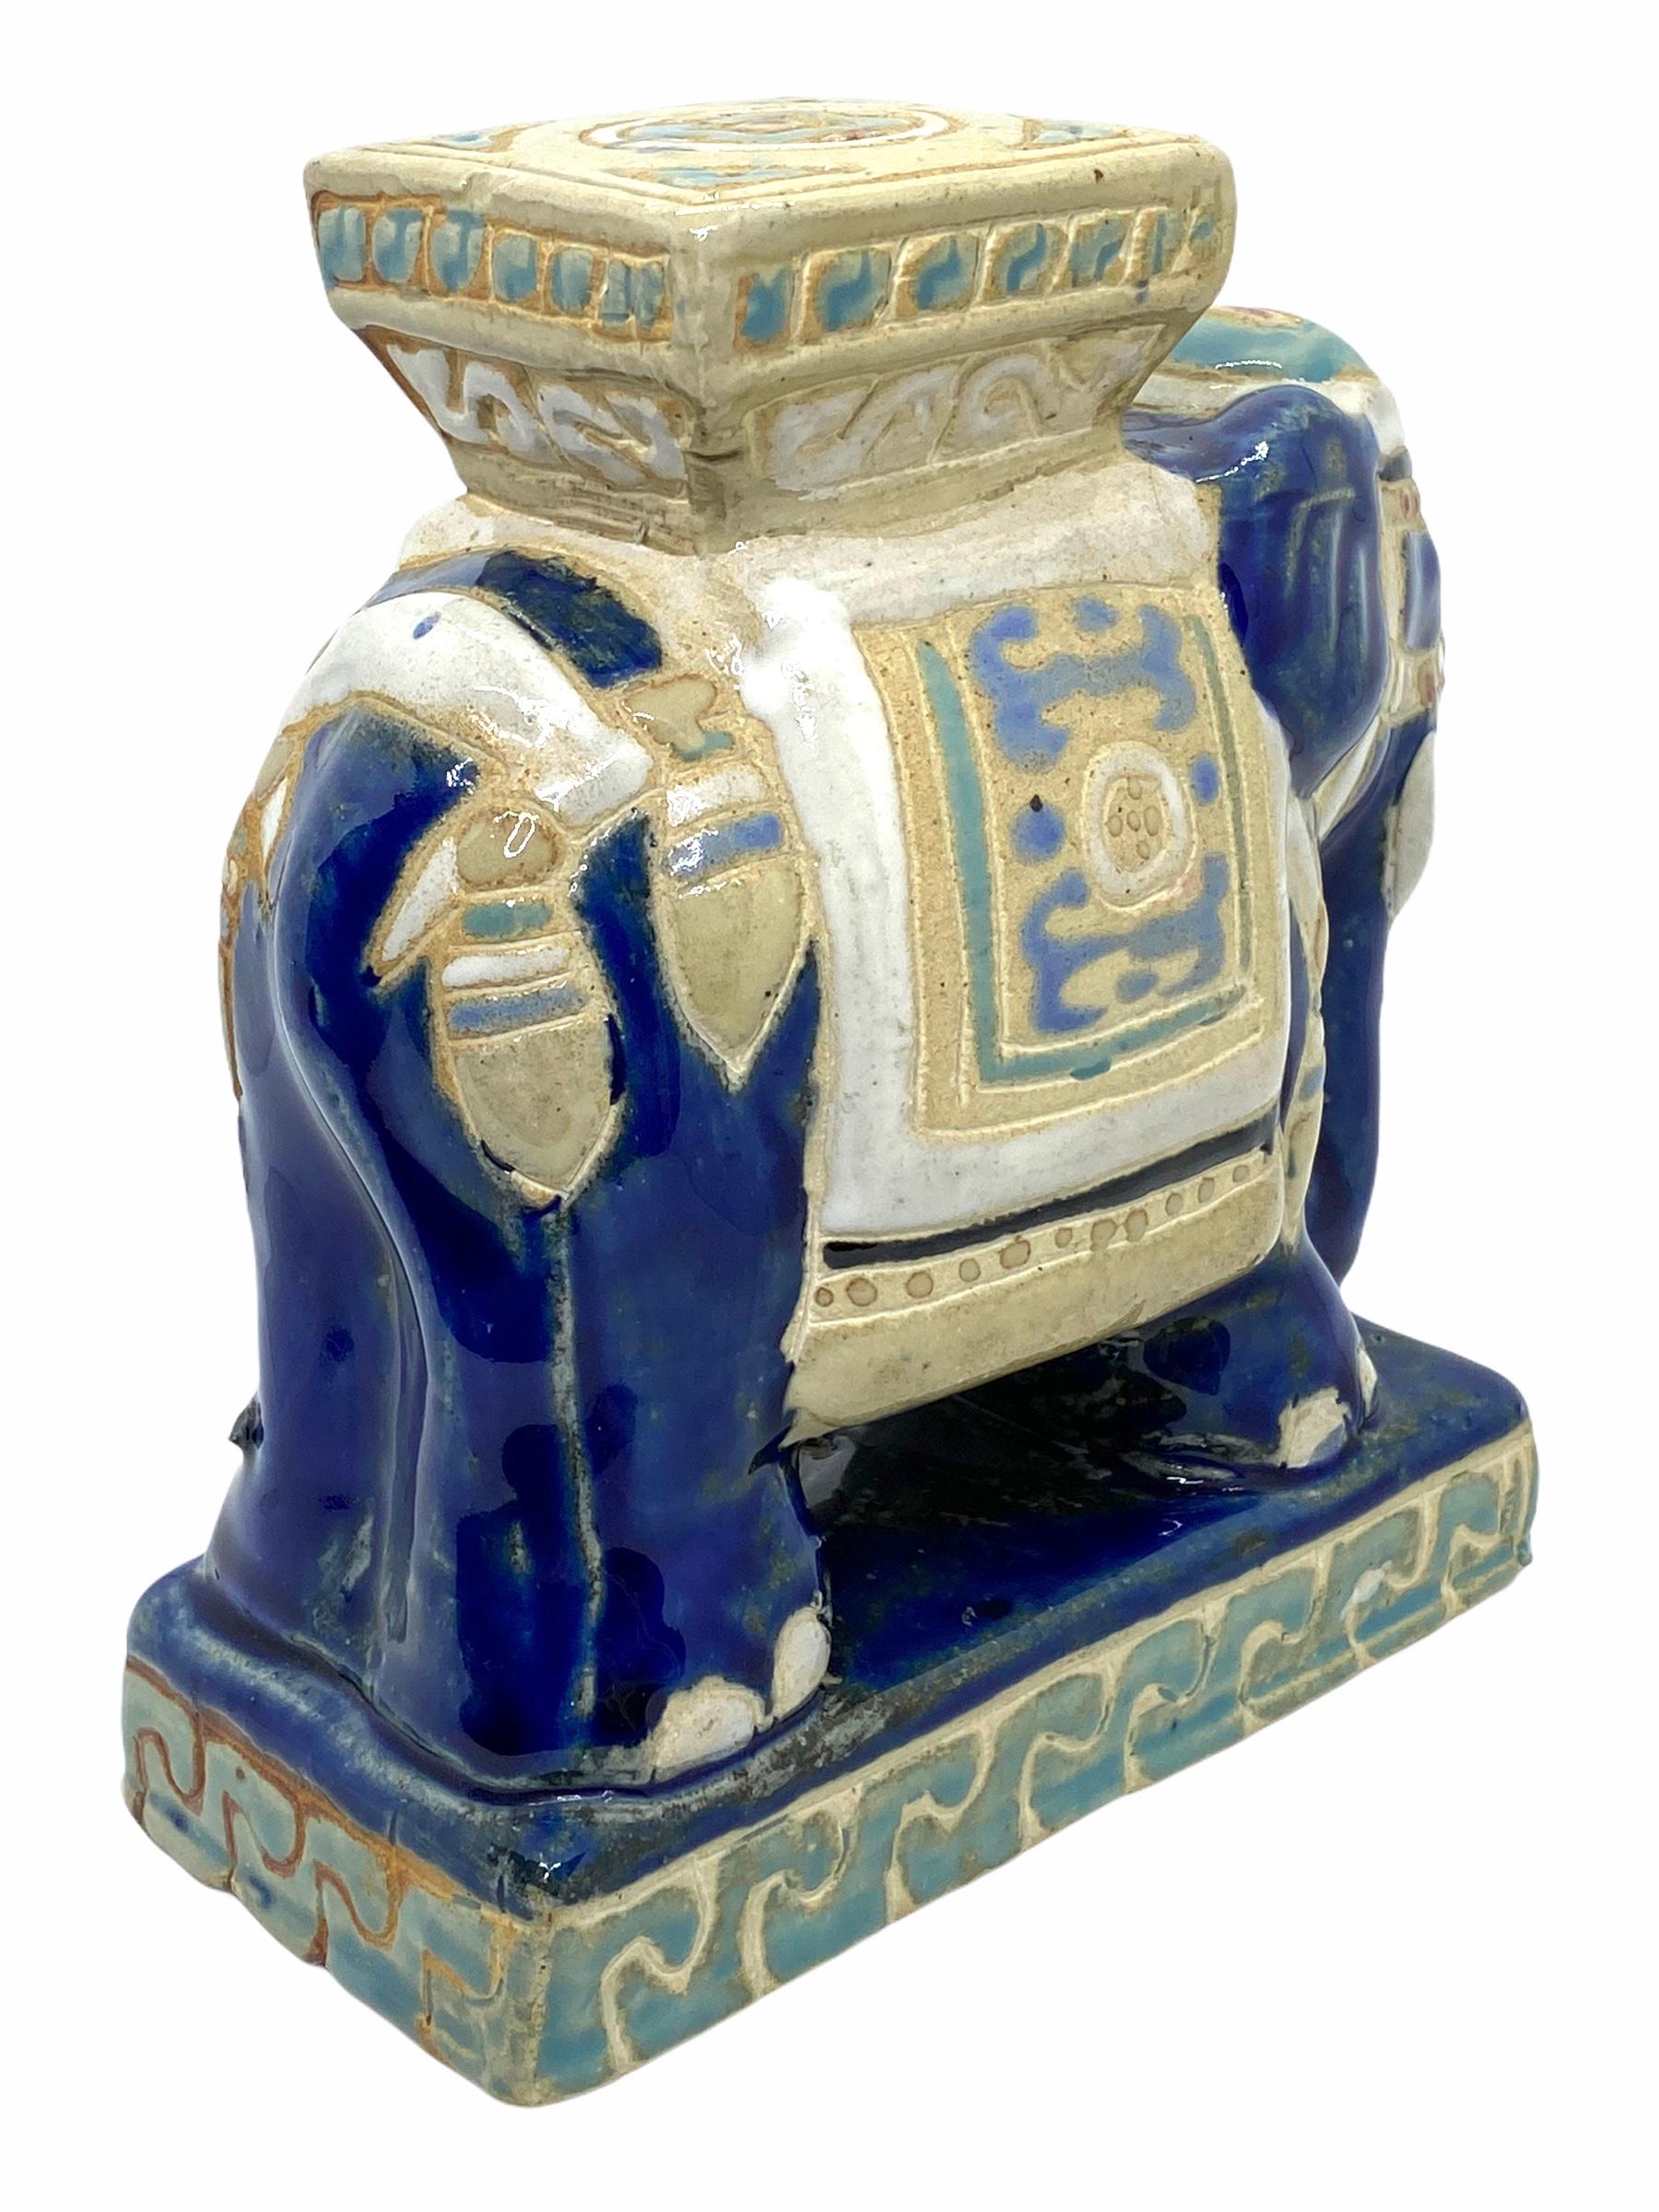 Ceramic Petite Vintage Hollywood Regency Chinese Blue Elephant Stool Plant Stand or Seat For Sale